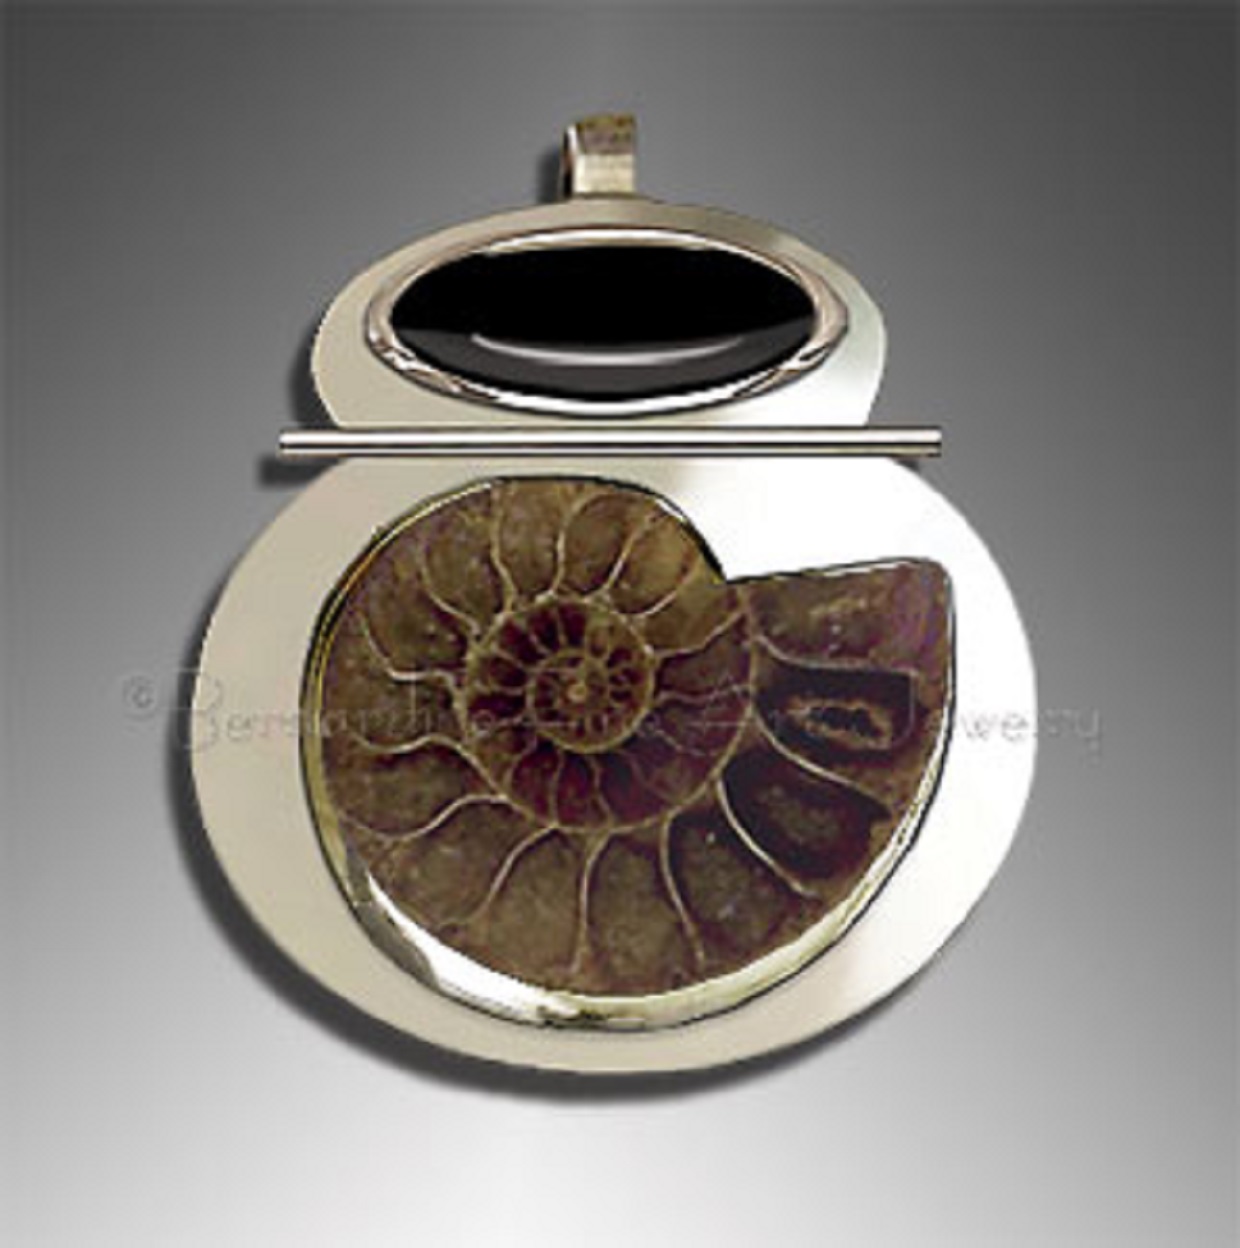 A number-eight-shaped fossil pendant in silver with black onyx and ammonite